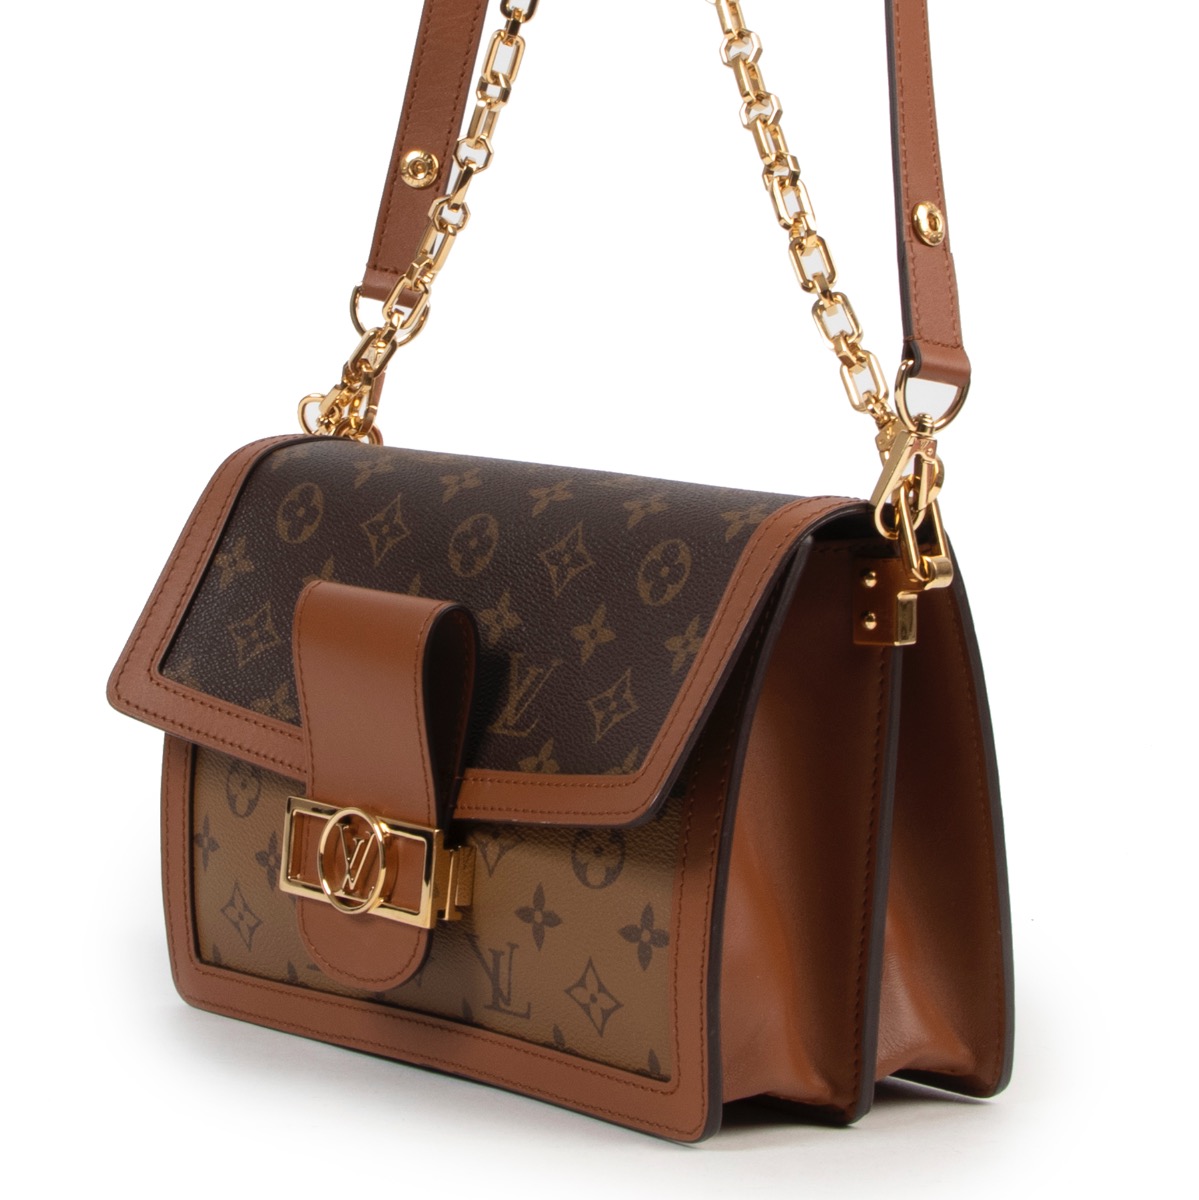 Lv Dauphine - For Sale on 1stDibs  lv dauphine black, dauphine leather  meaning, dauphine lv